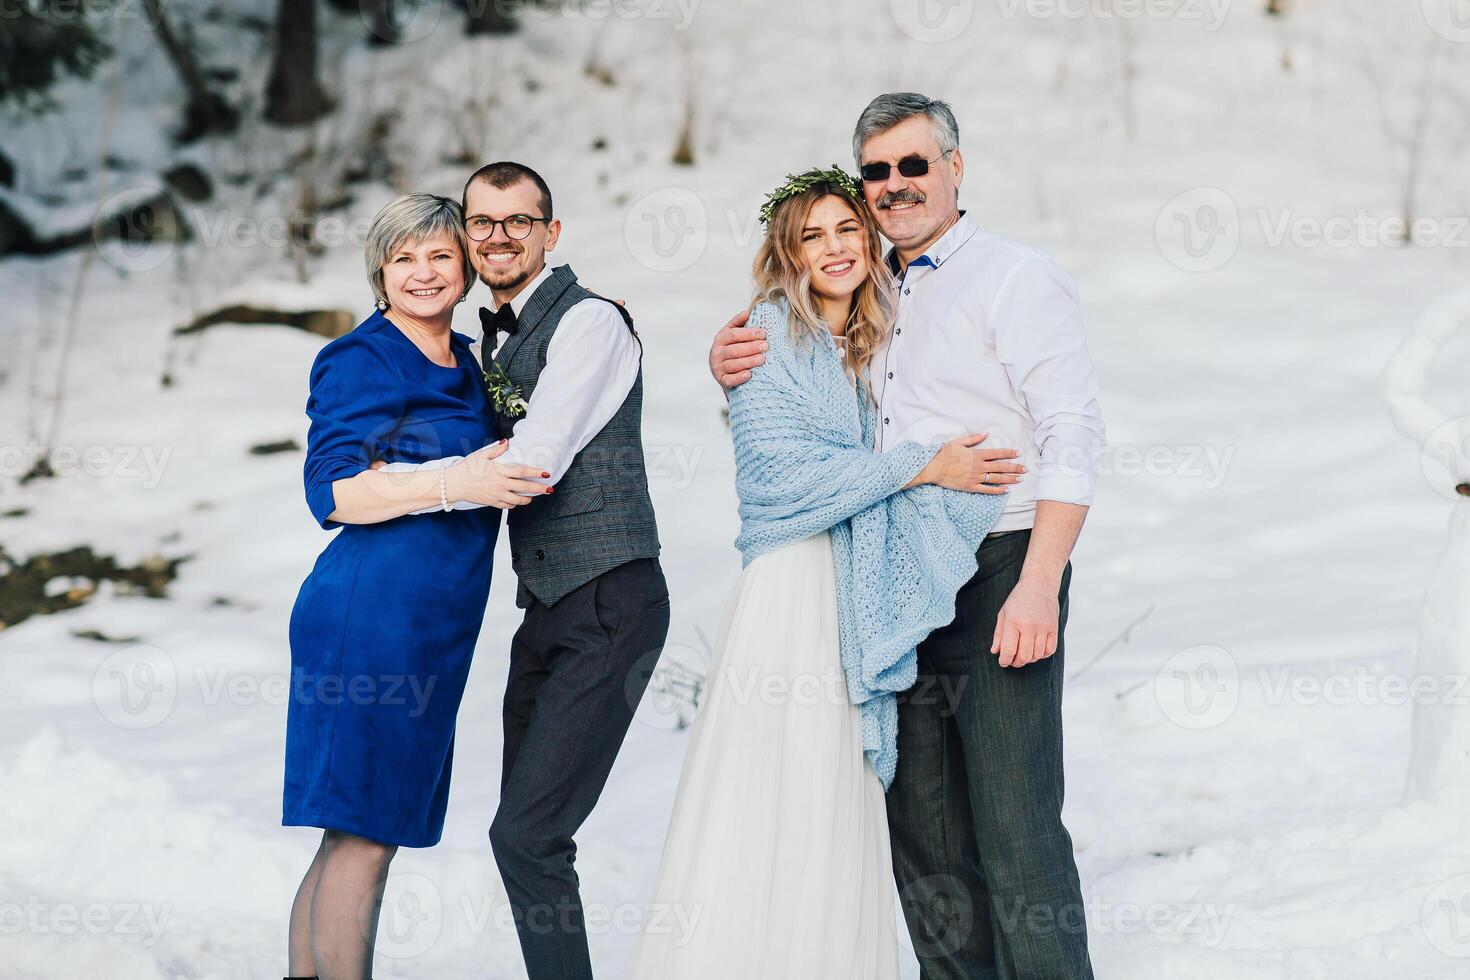 Weddings, couples and family celebrating marriage for commitment, trust or relationship support. Portrait of married bride and groom with happy parents. Wedding in winter photo